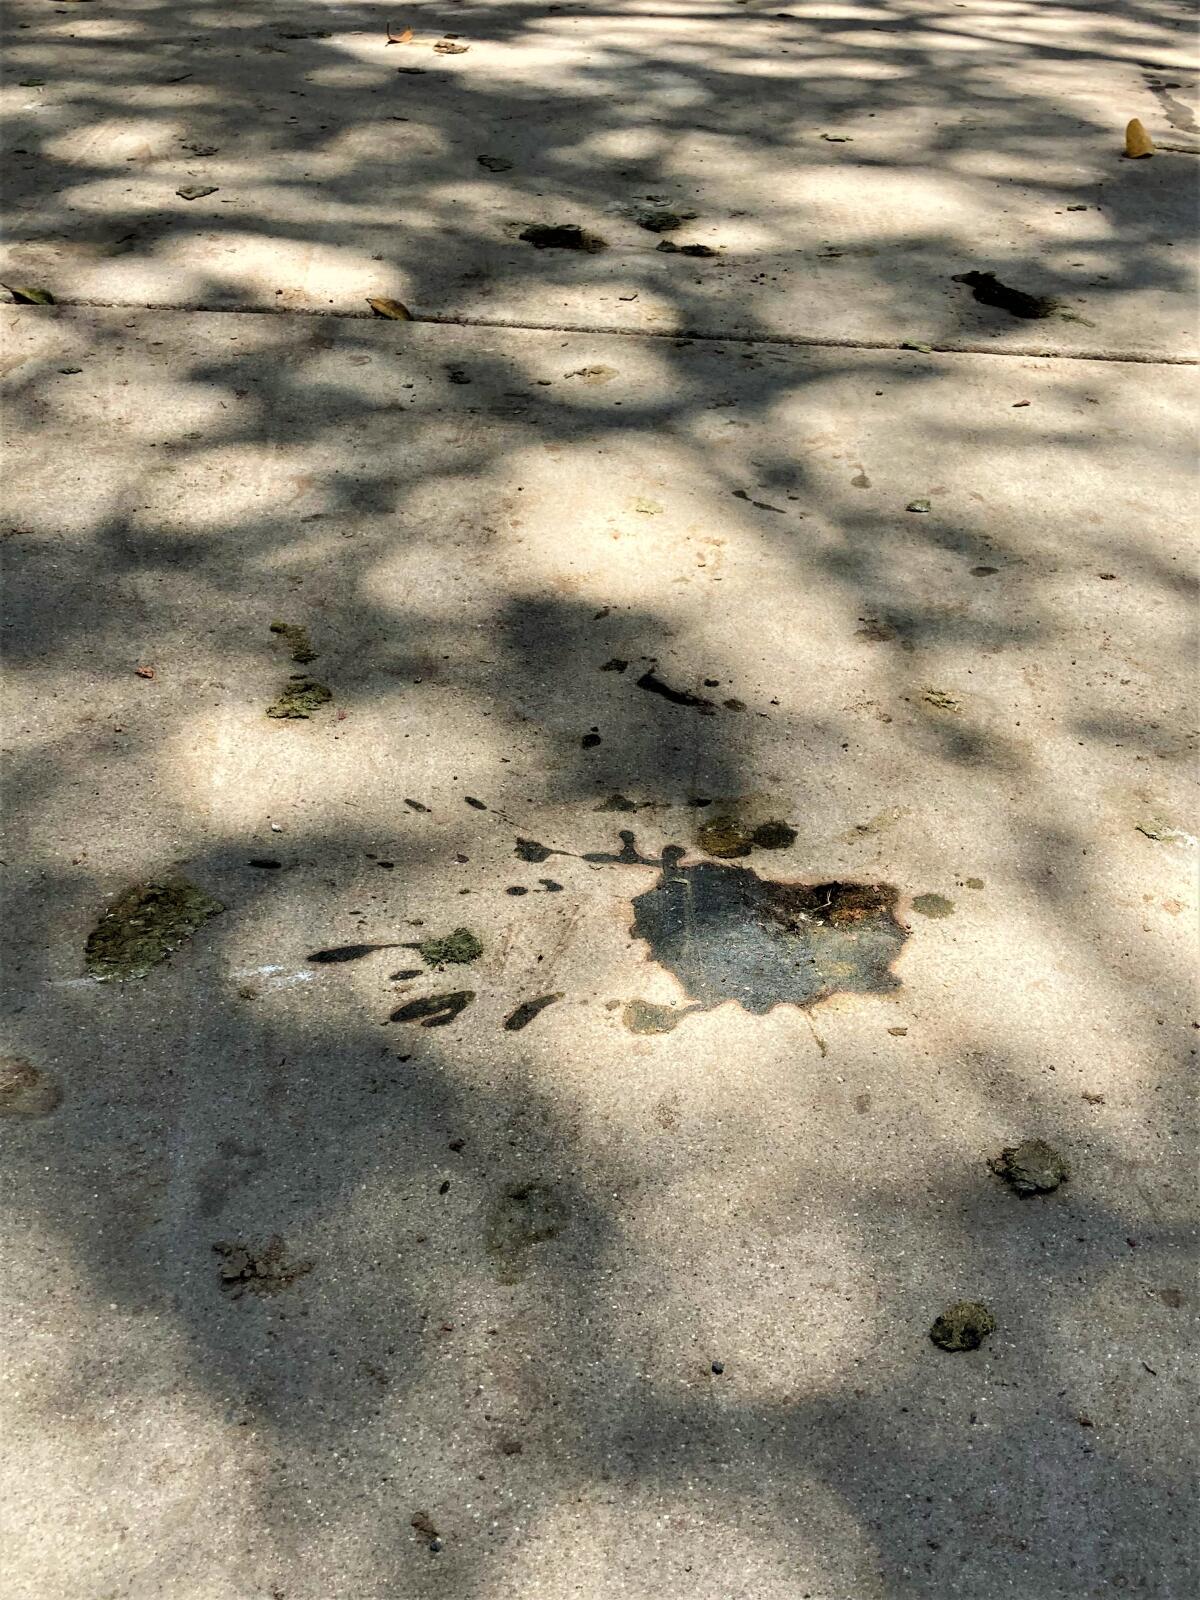 A sidewalk at TeWinkle Park is covered with remnants of excrement from a multitude of birds who reside there.